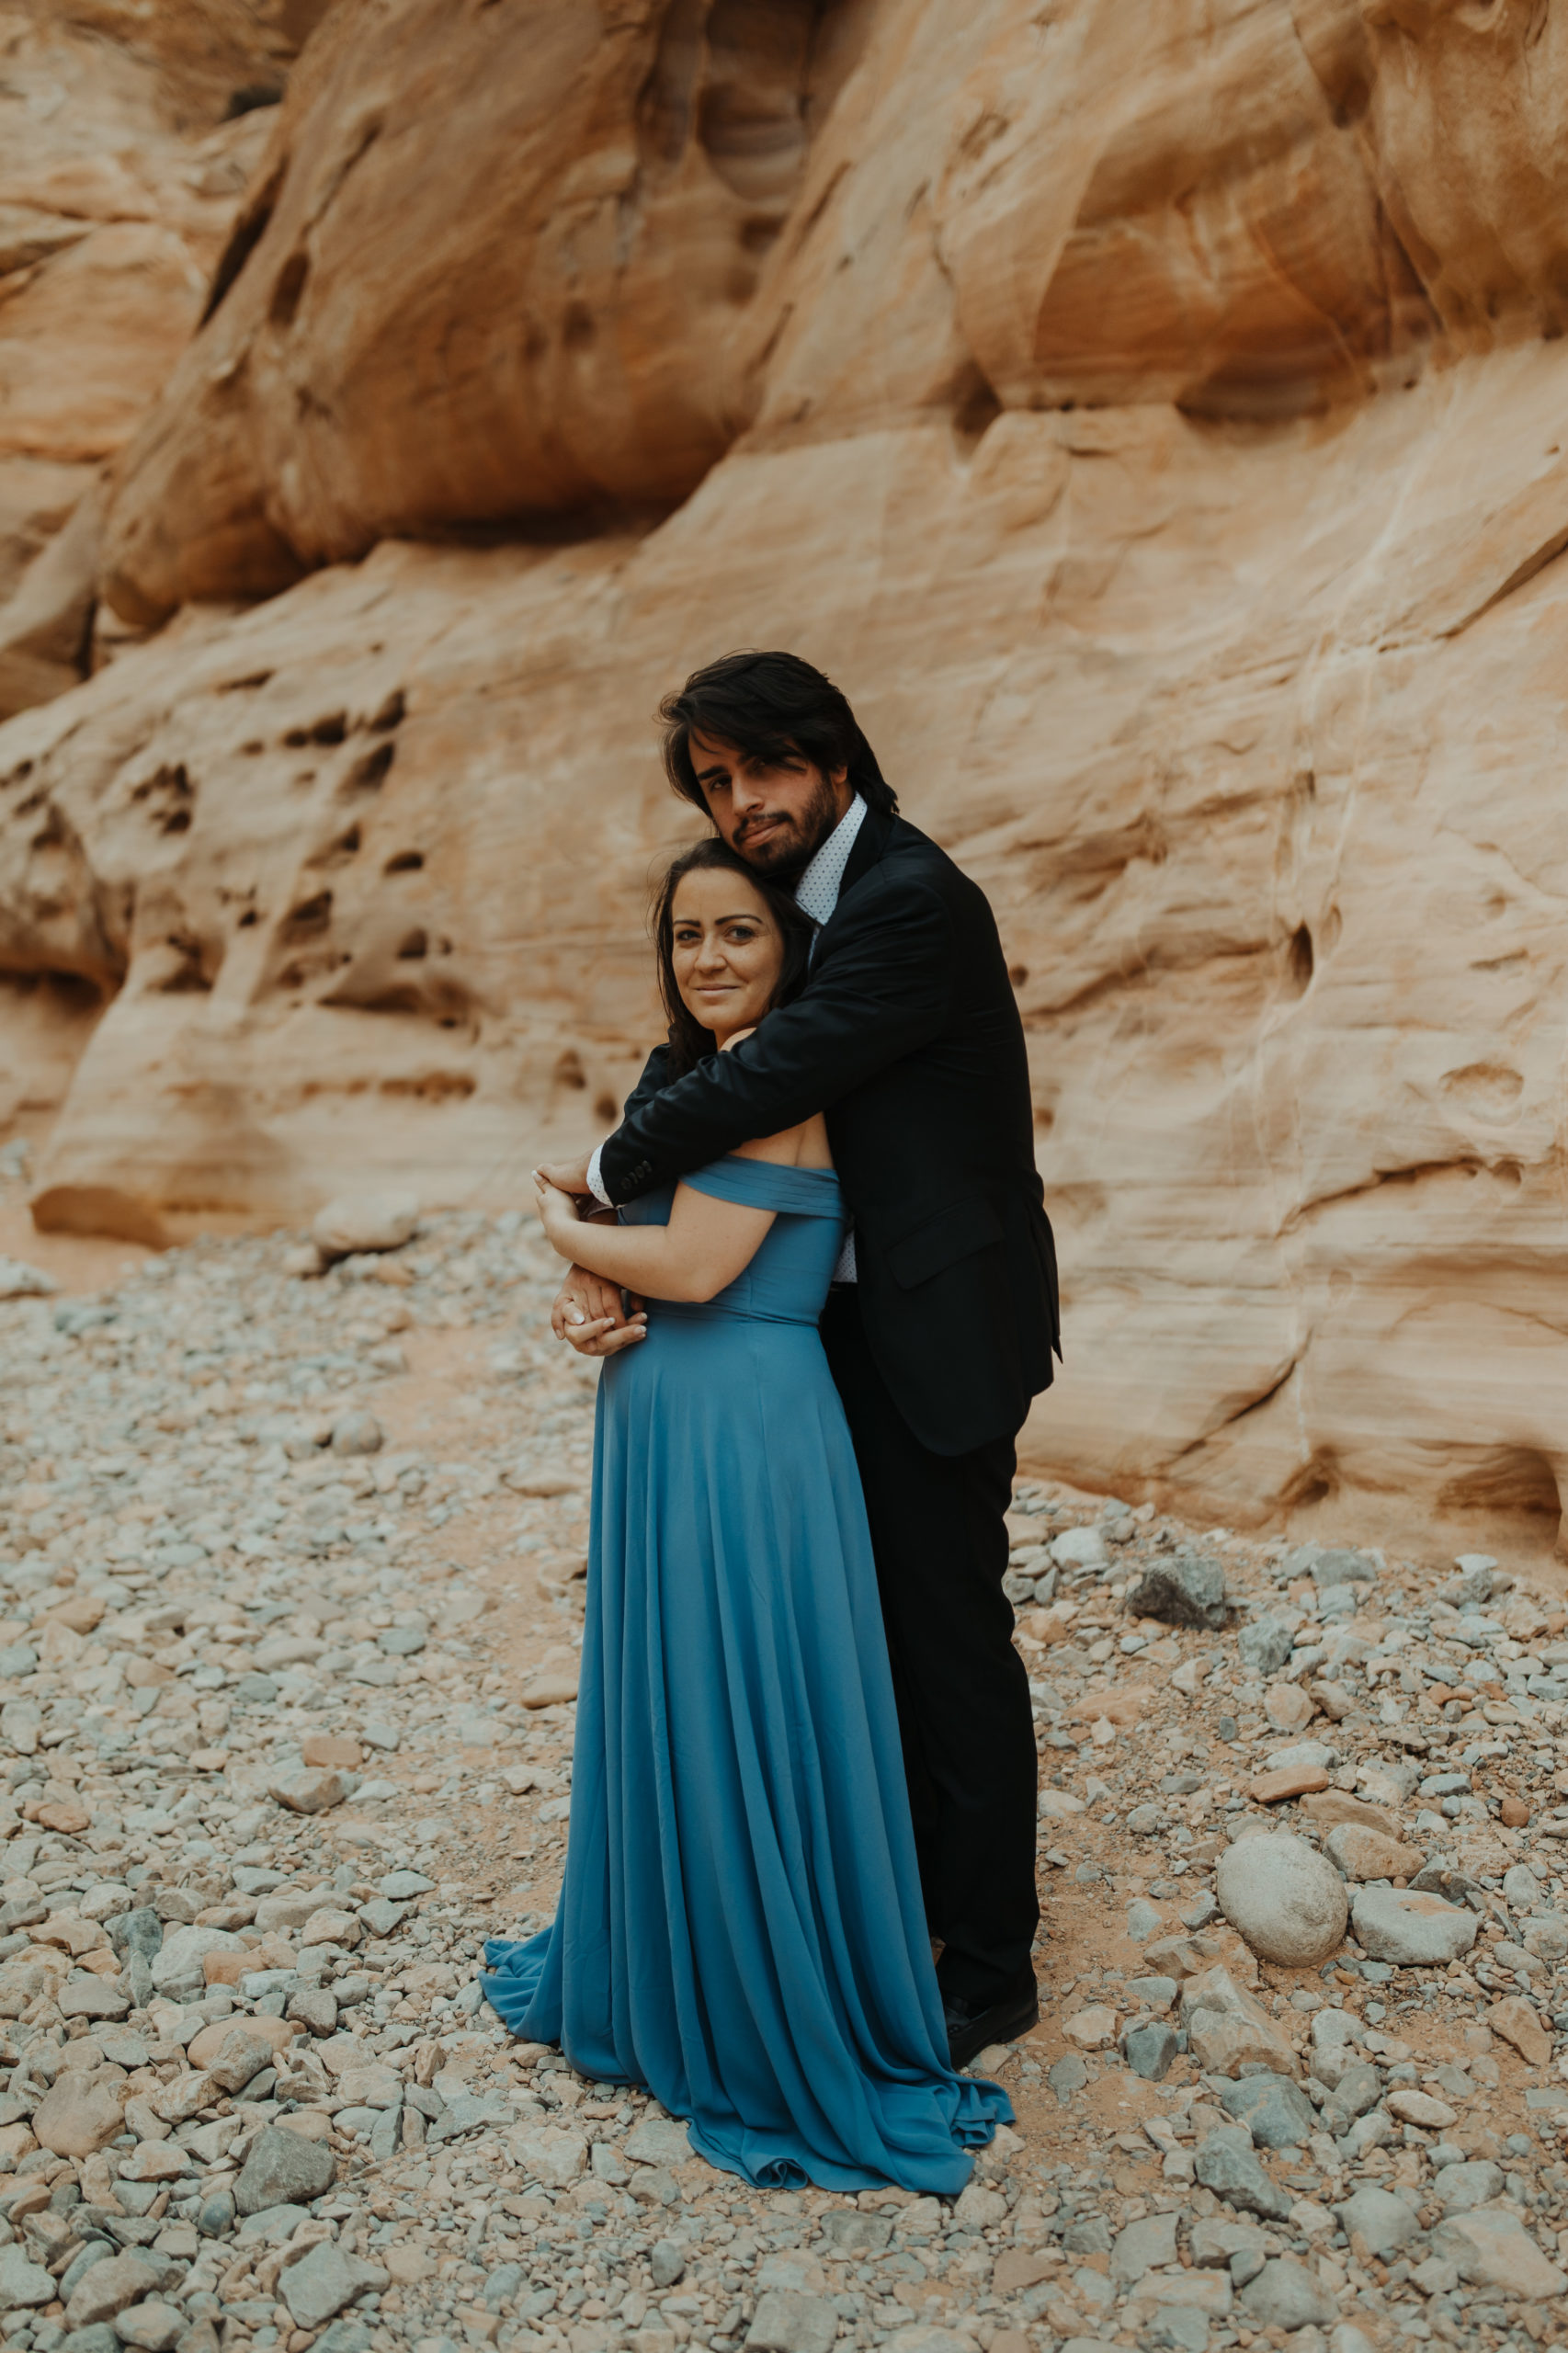 Couple in formal attire standing next to each other with tan rocks behind them